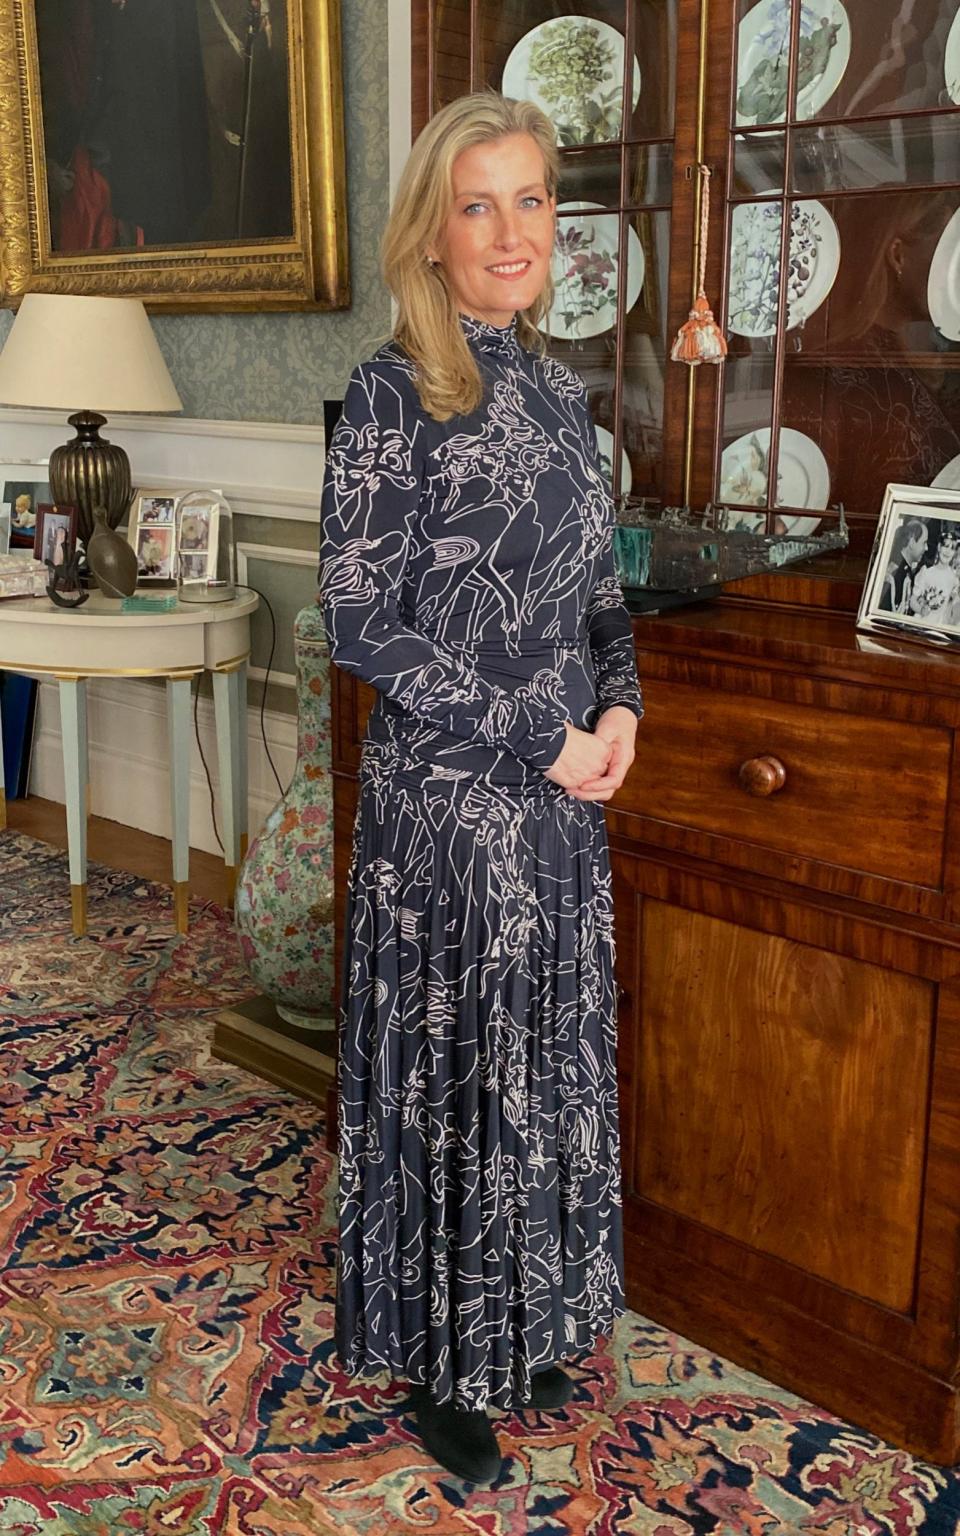 The Countess of Wessex wore Victoria Beckham for the event - Buckingham Palace